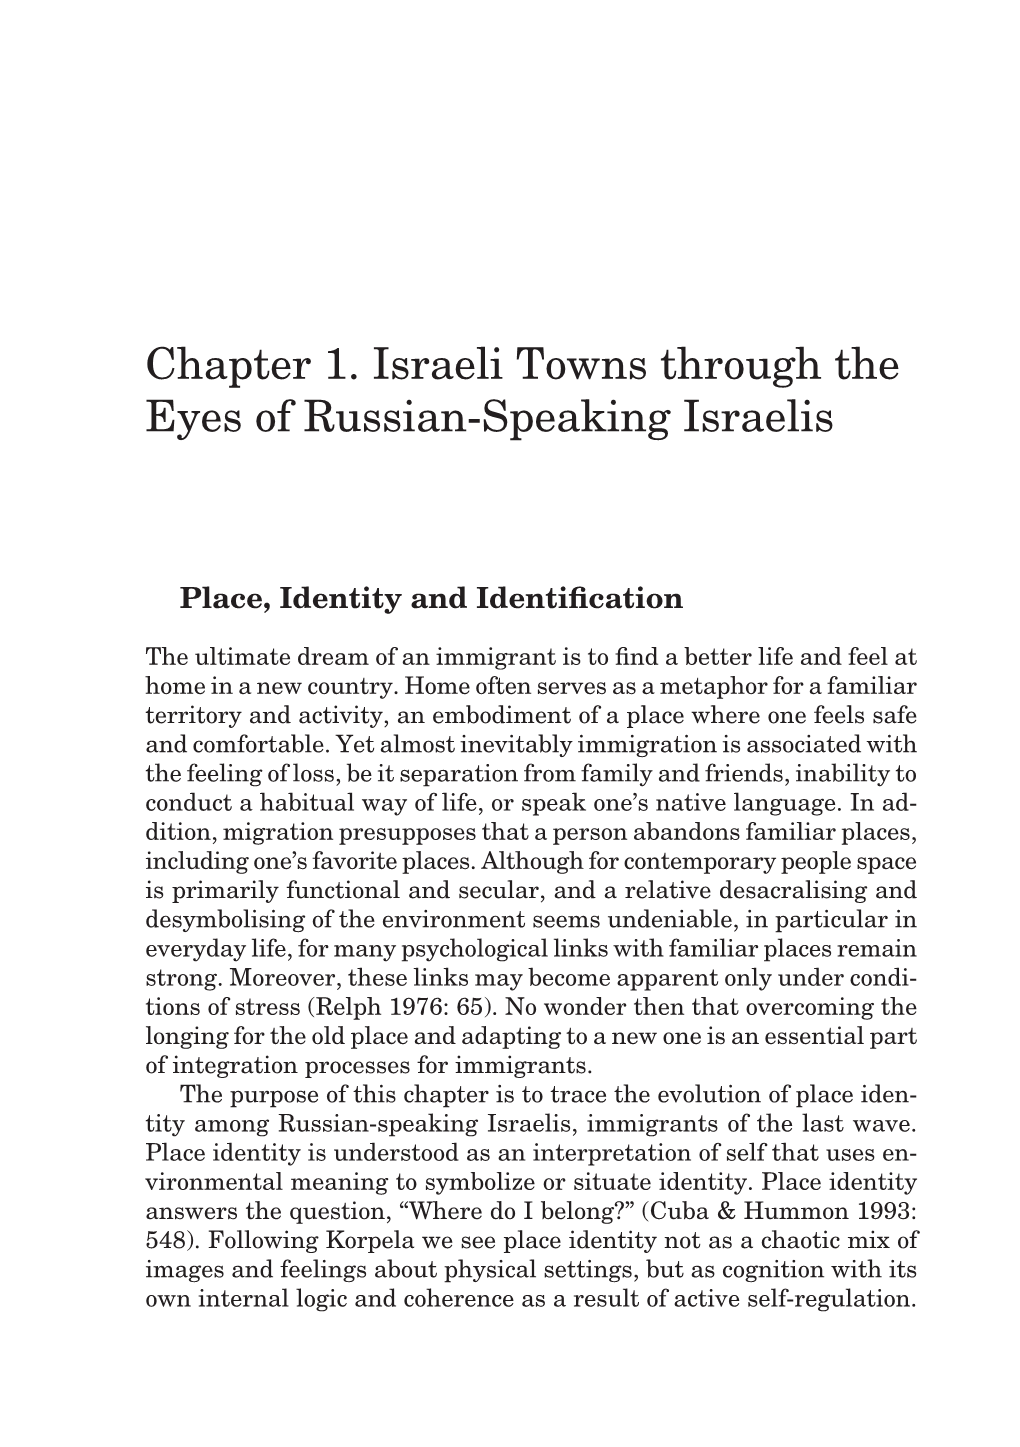 Chapter 1. Israeli Towns Through the Eyes of Russian-Speaking Israelis